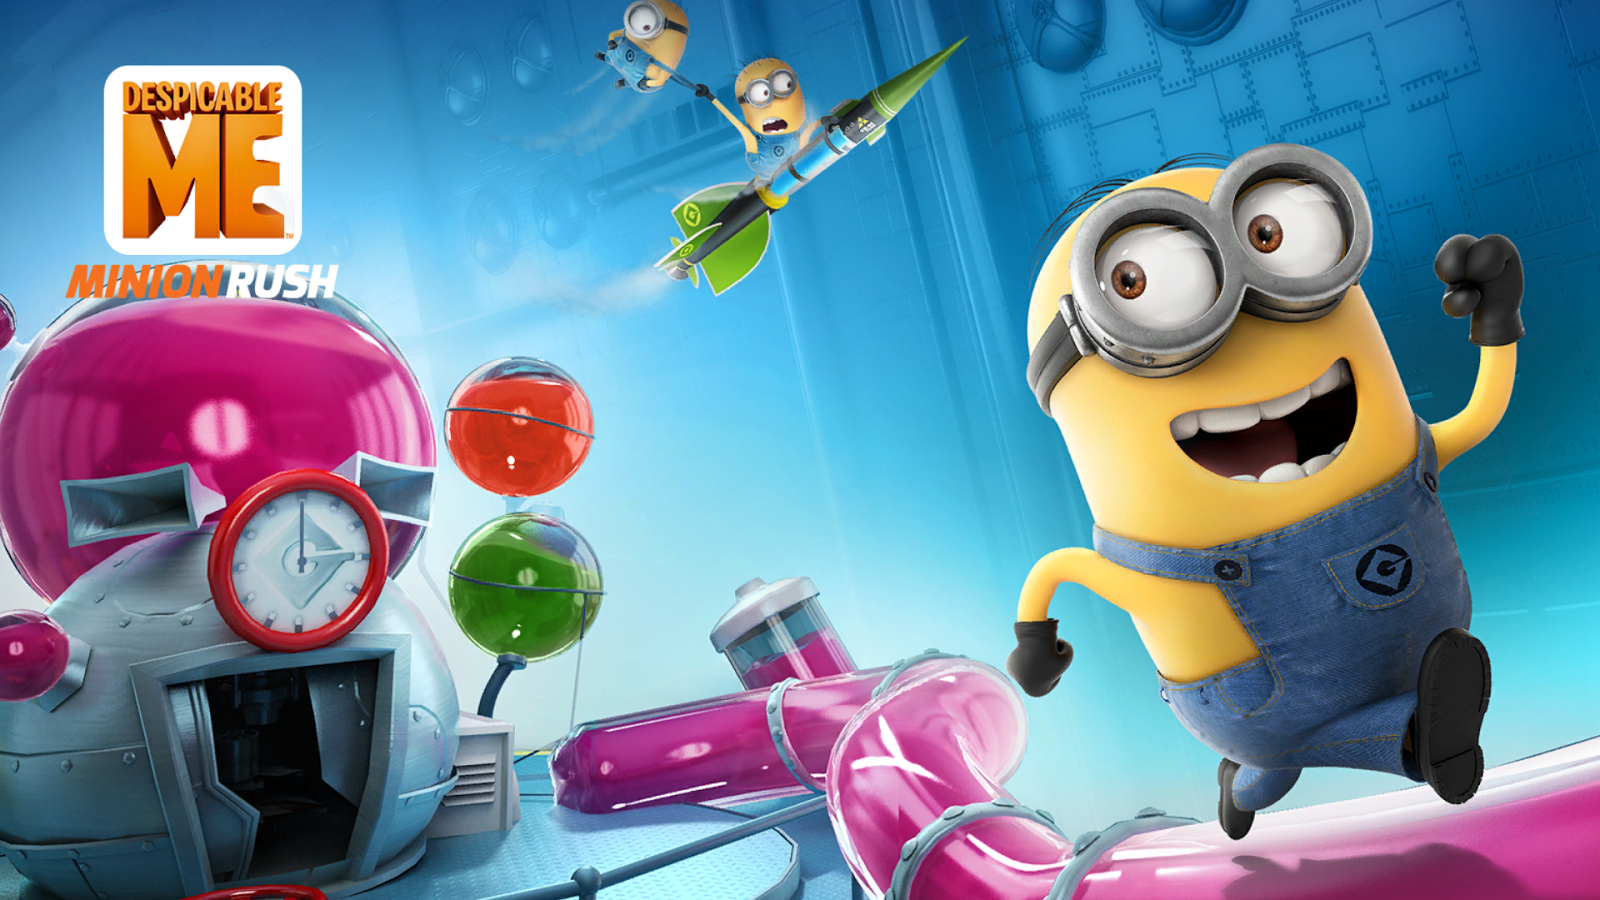 Despicable Me: Minion Rush receives Jelly Update across Android